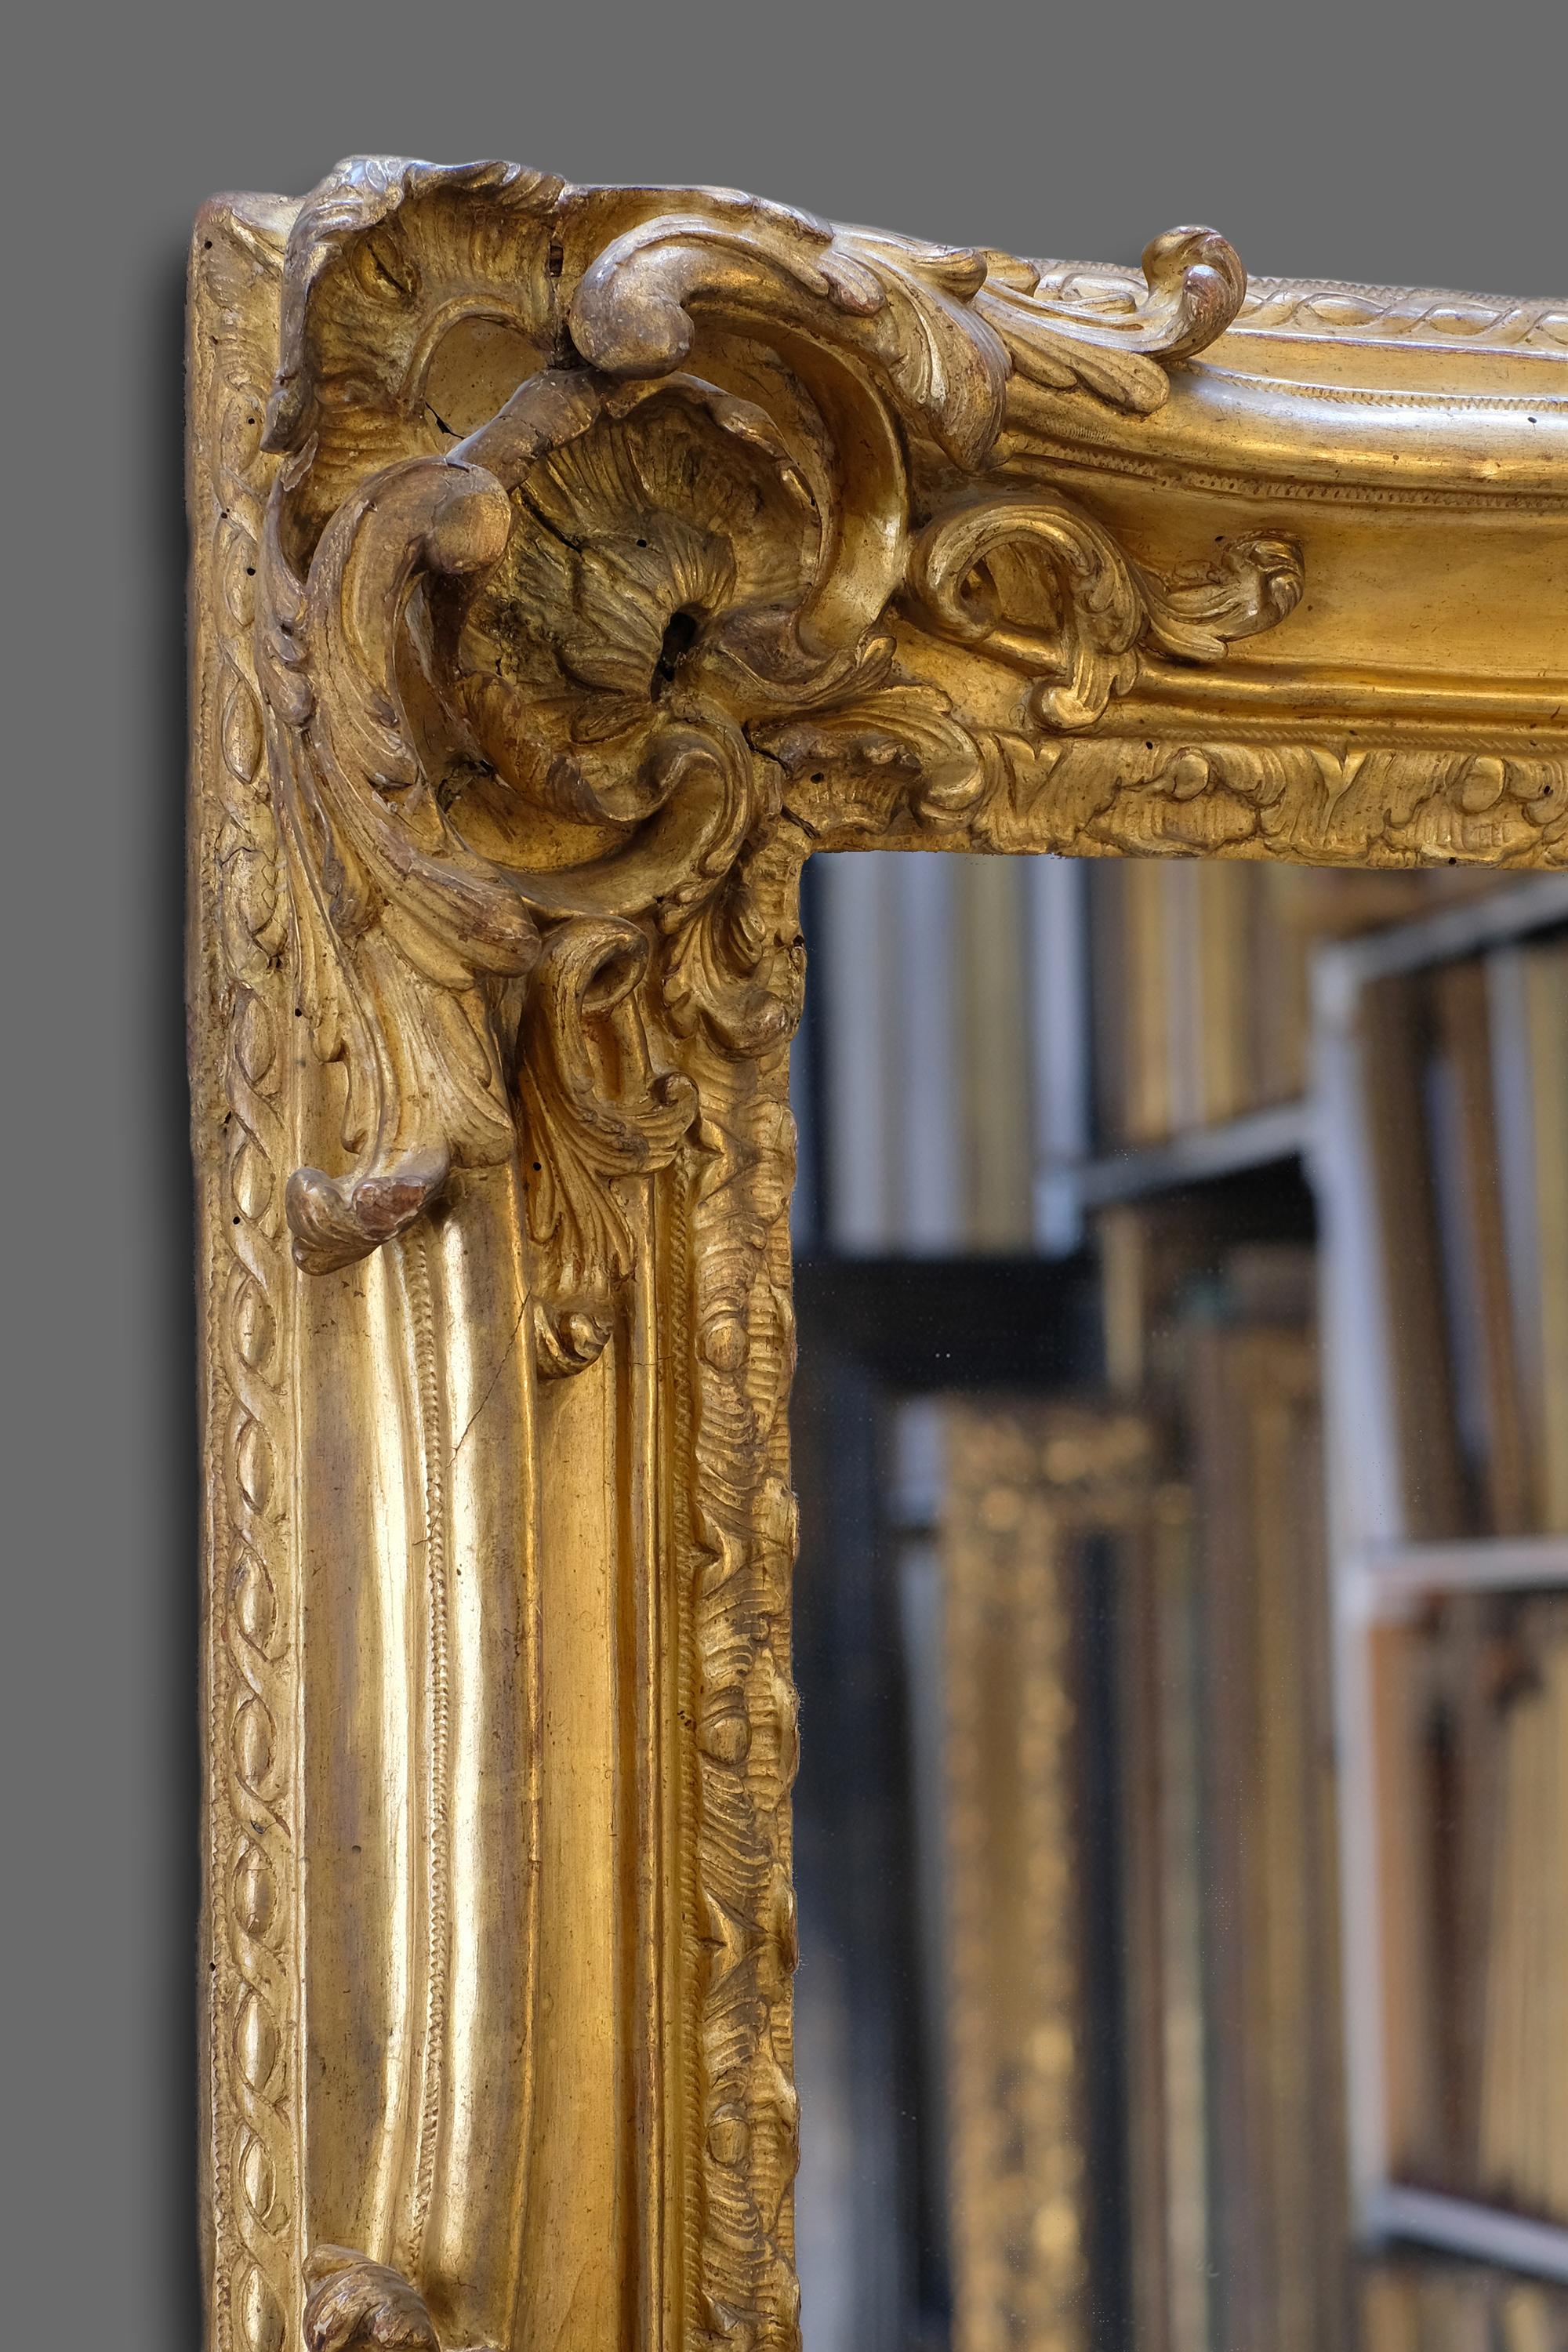 A very elegant and finely hand carved 18th century French Provençal Louis XV Rococo frame. It has a concave profile with carved corner and centre openwork cartouches with foliate scrolls, shells and rocailles on a channeled ground, linked by swept